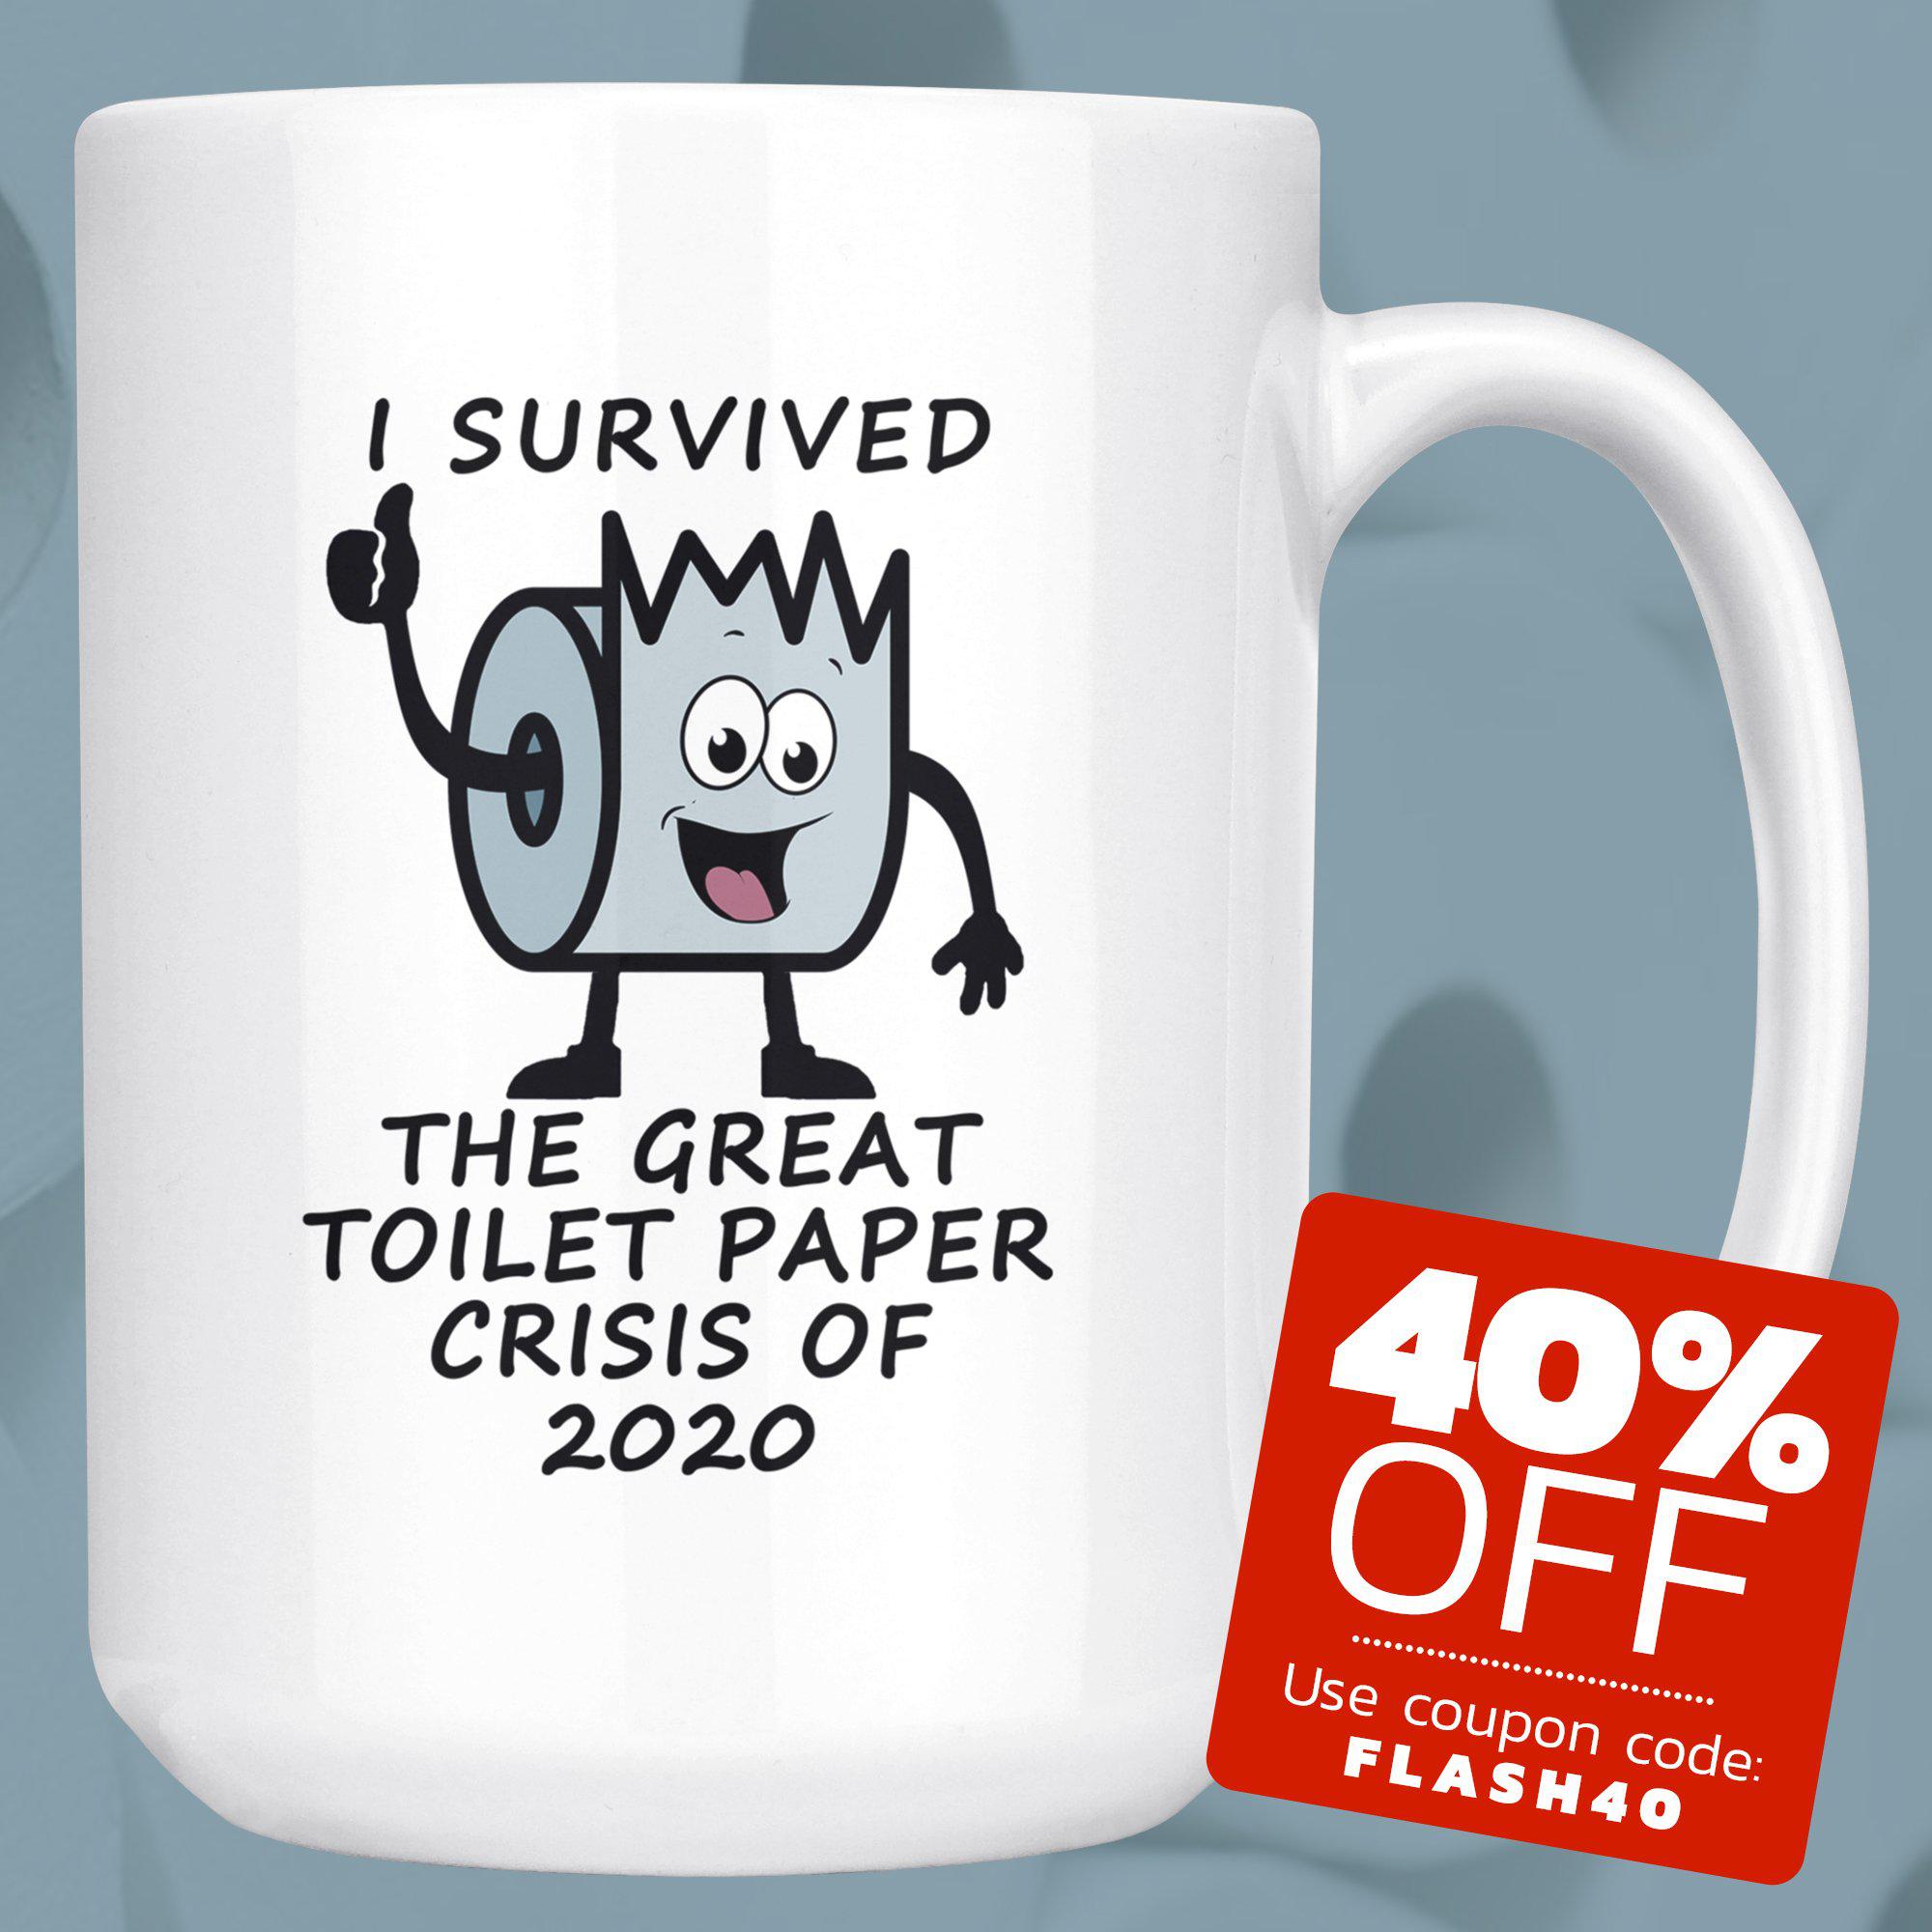 I Survived the Great Toilet Paper Crisis of 2020, Mug